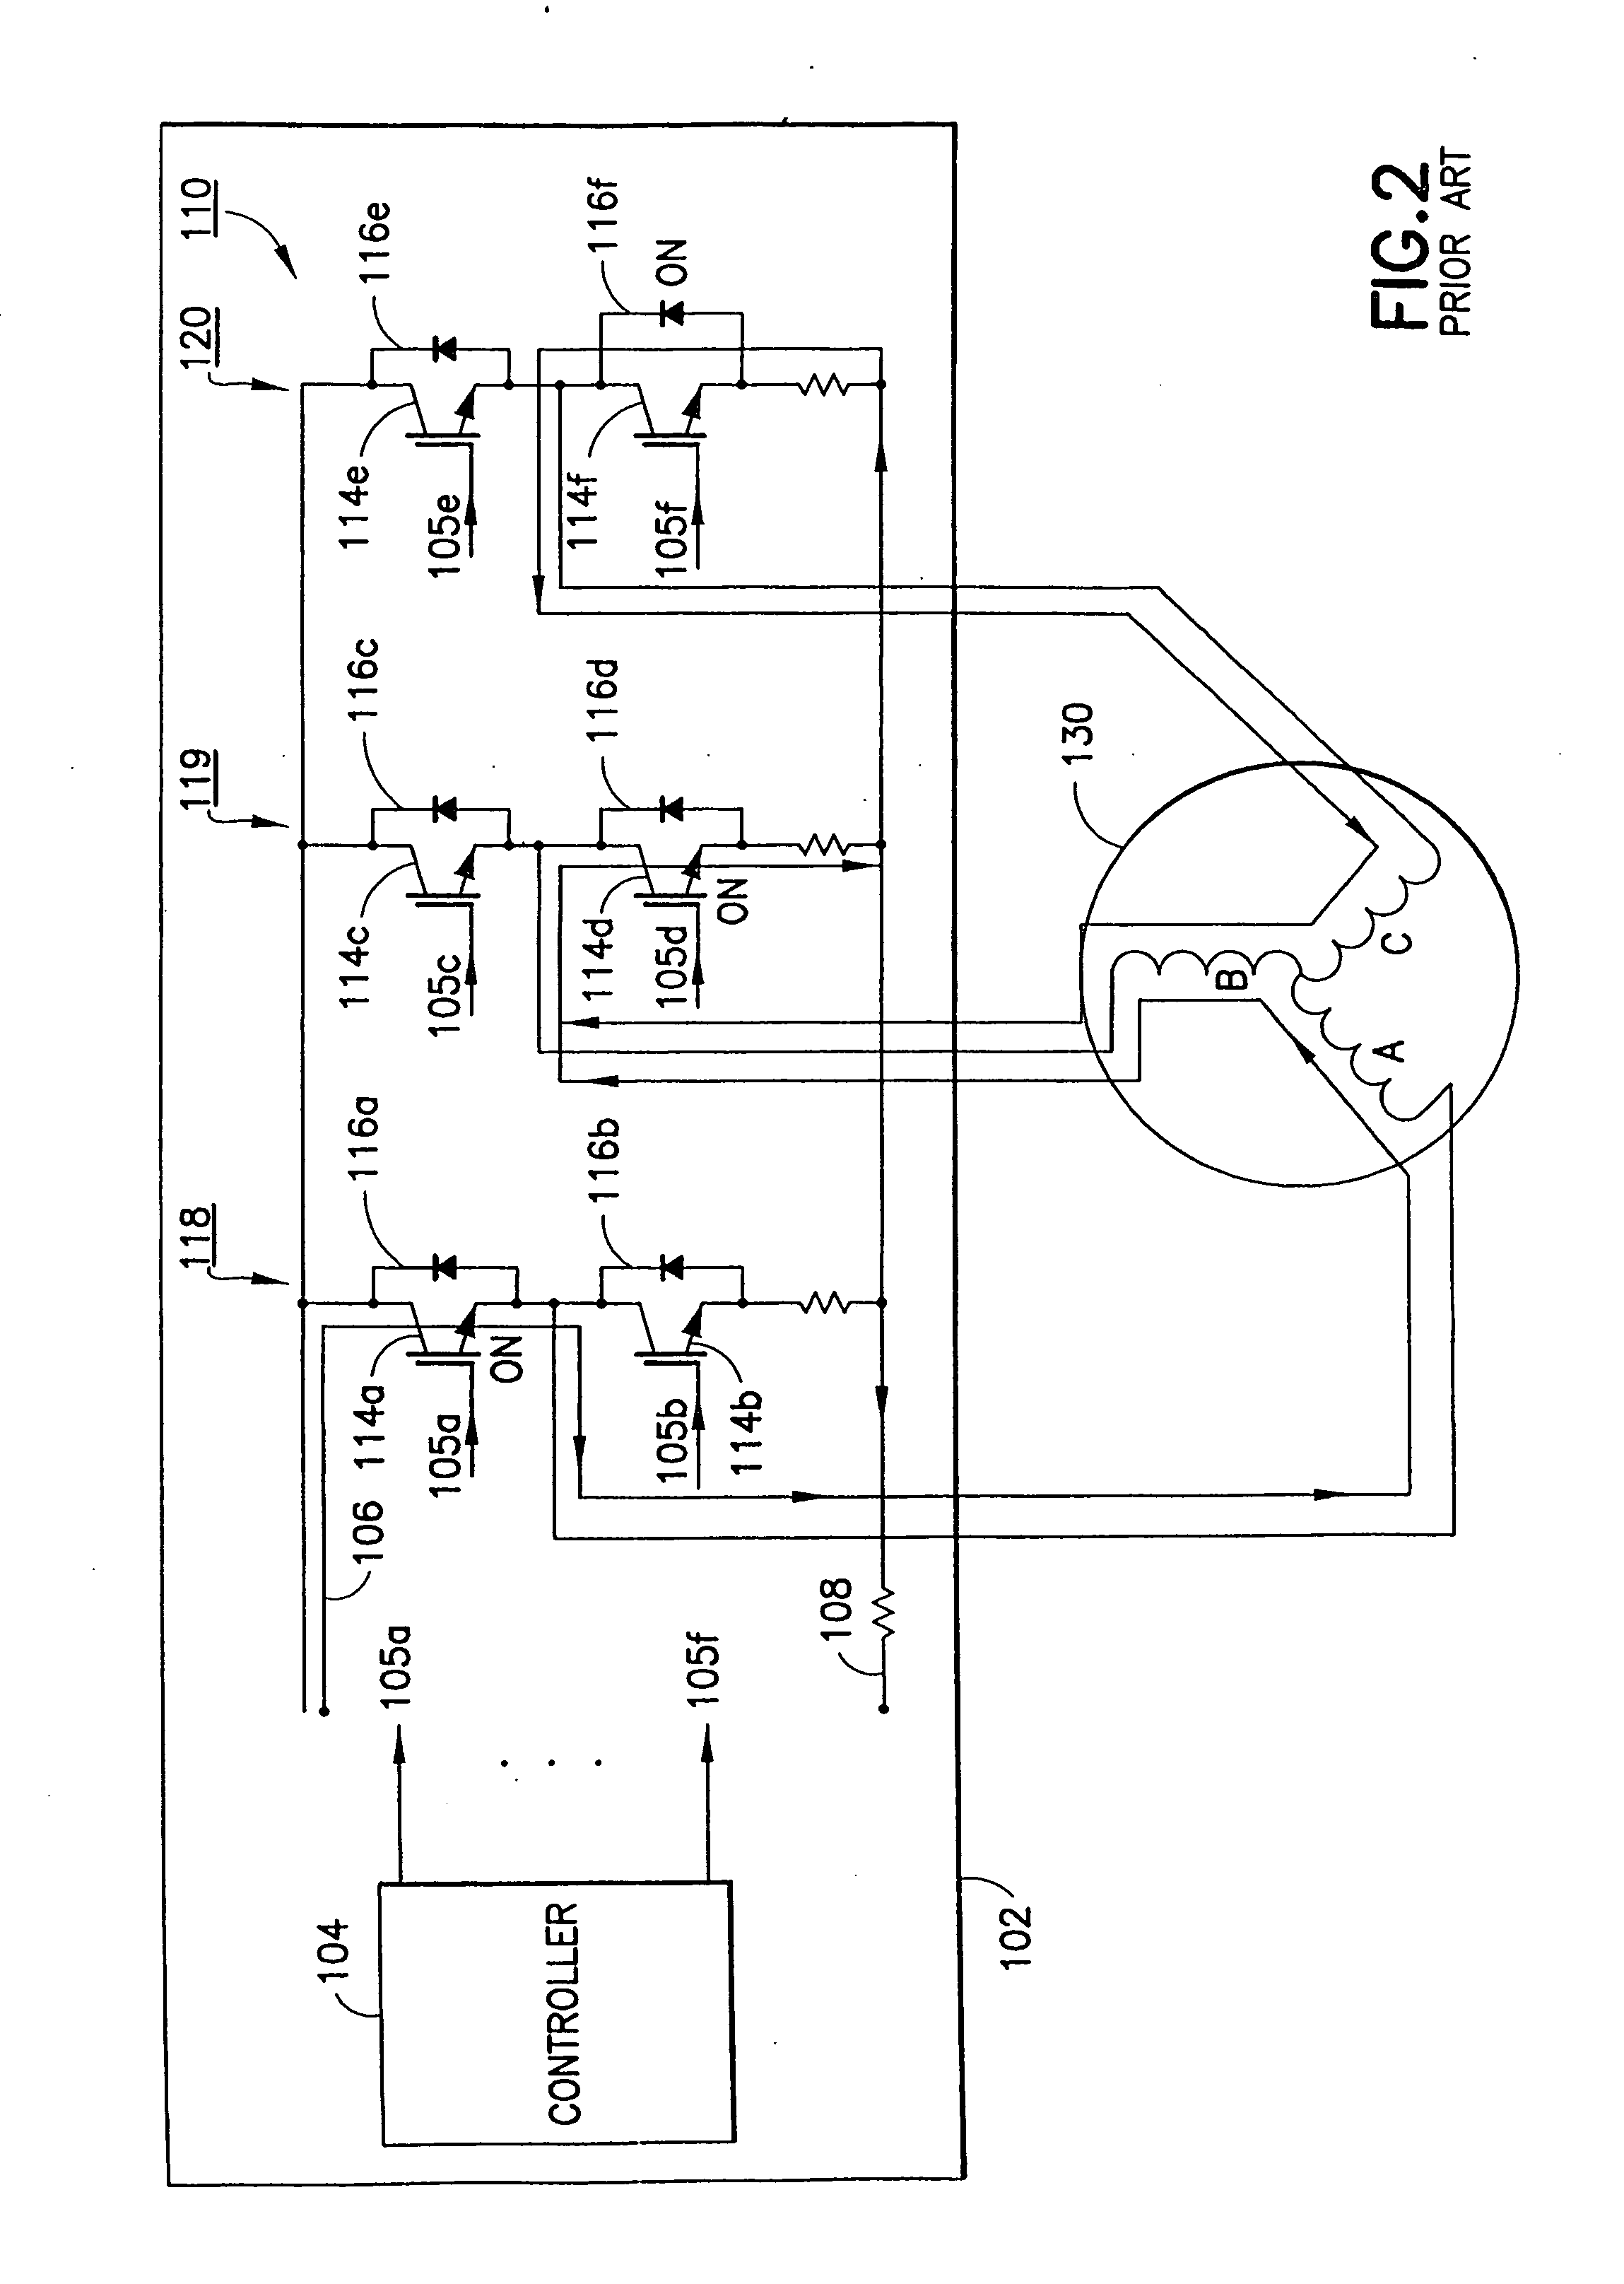 Motor drive inverter that includes III-nitride based power semiconductor devices